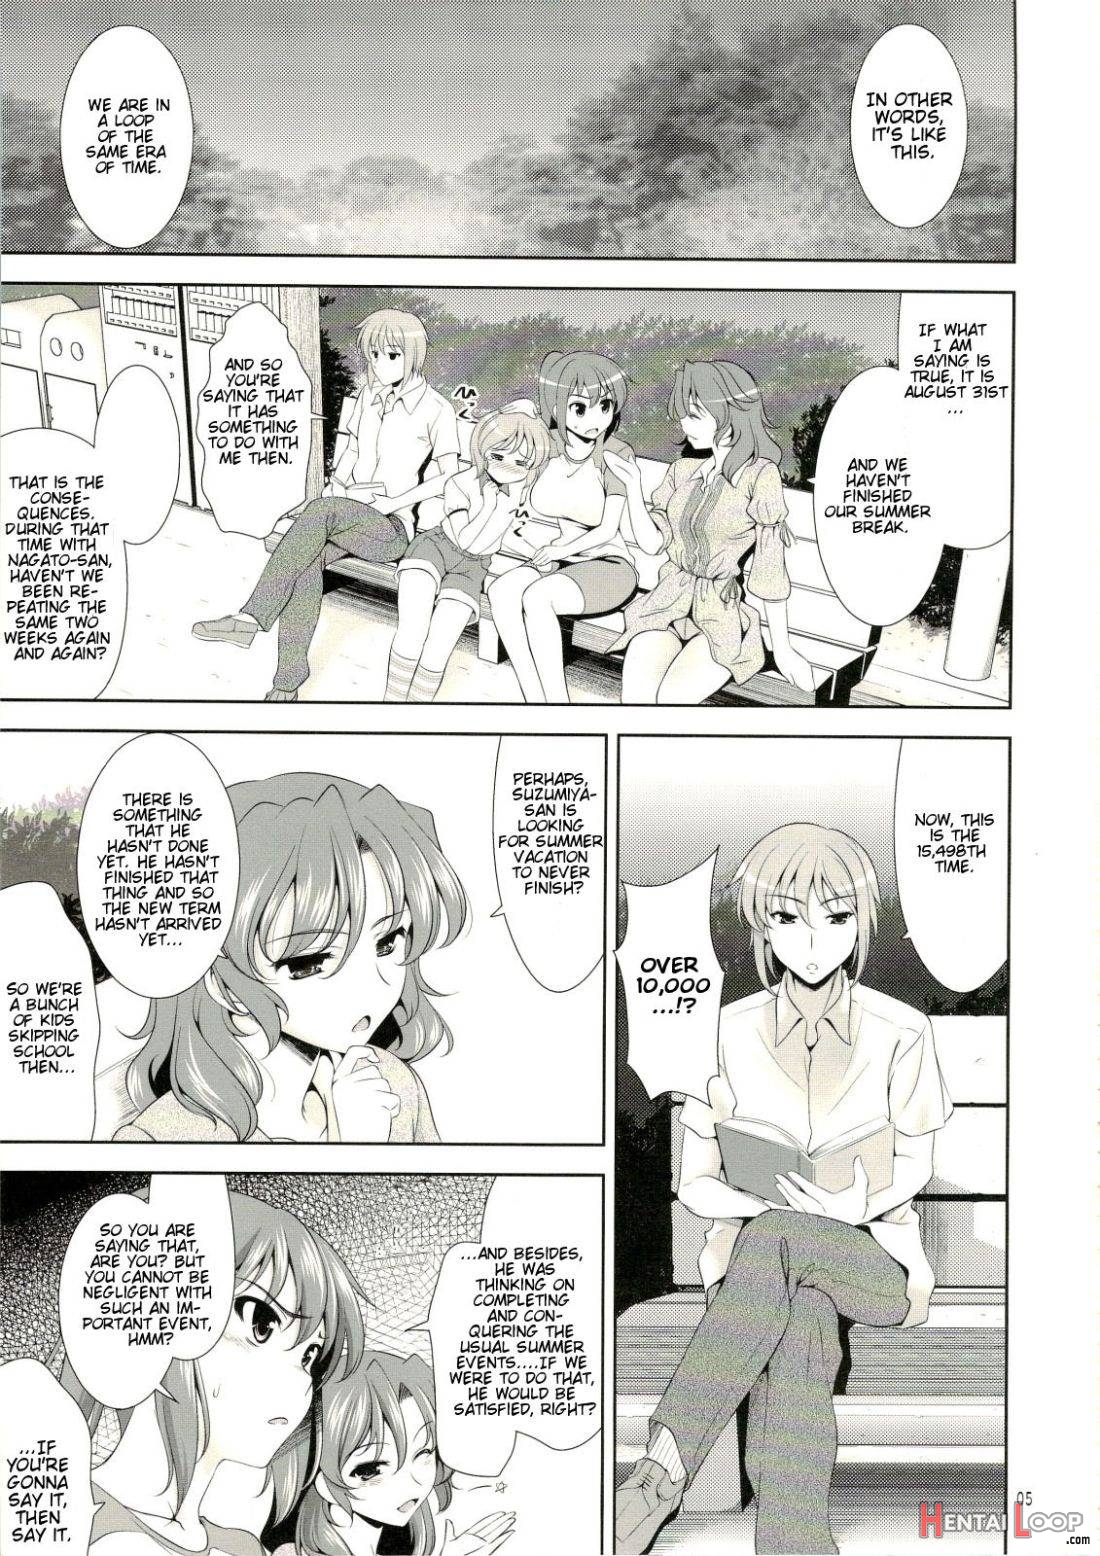 Manatsu no Yo no Yume no Mata Yume no Mata Yume page 2